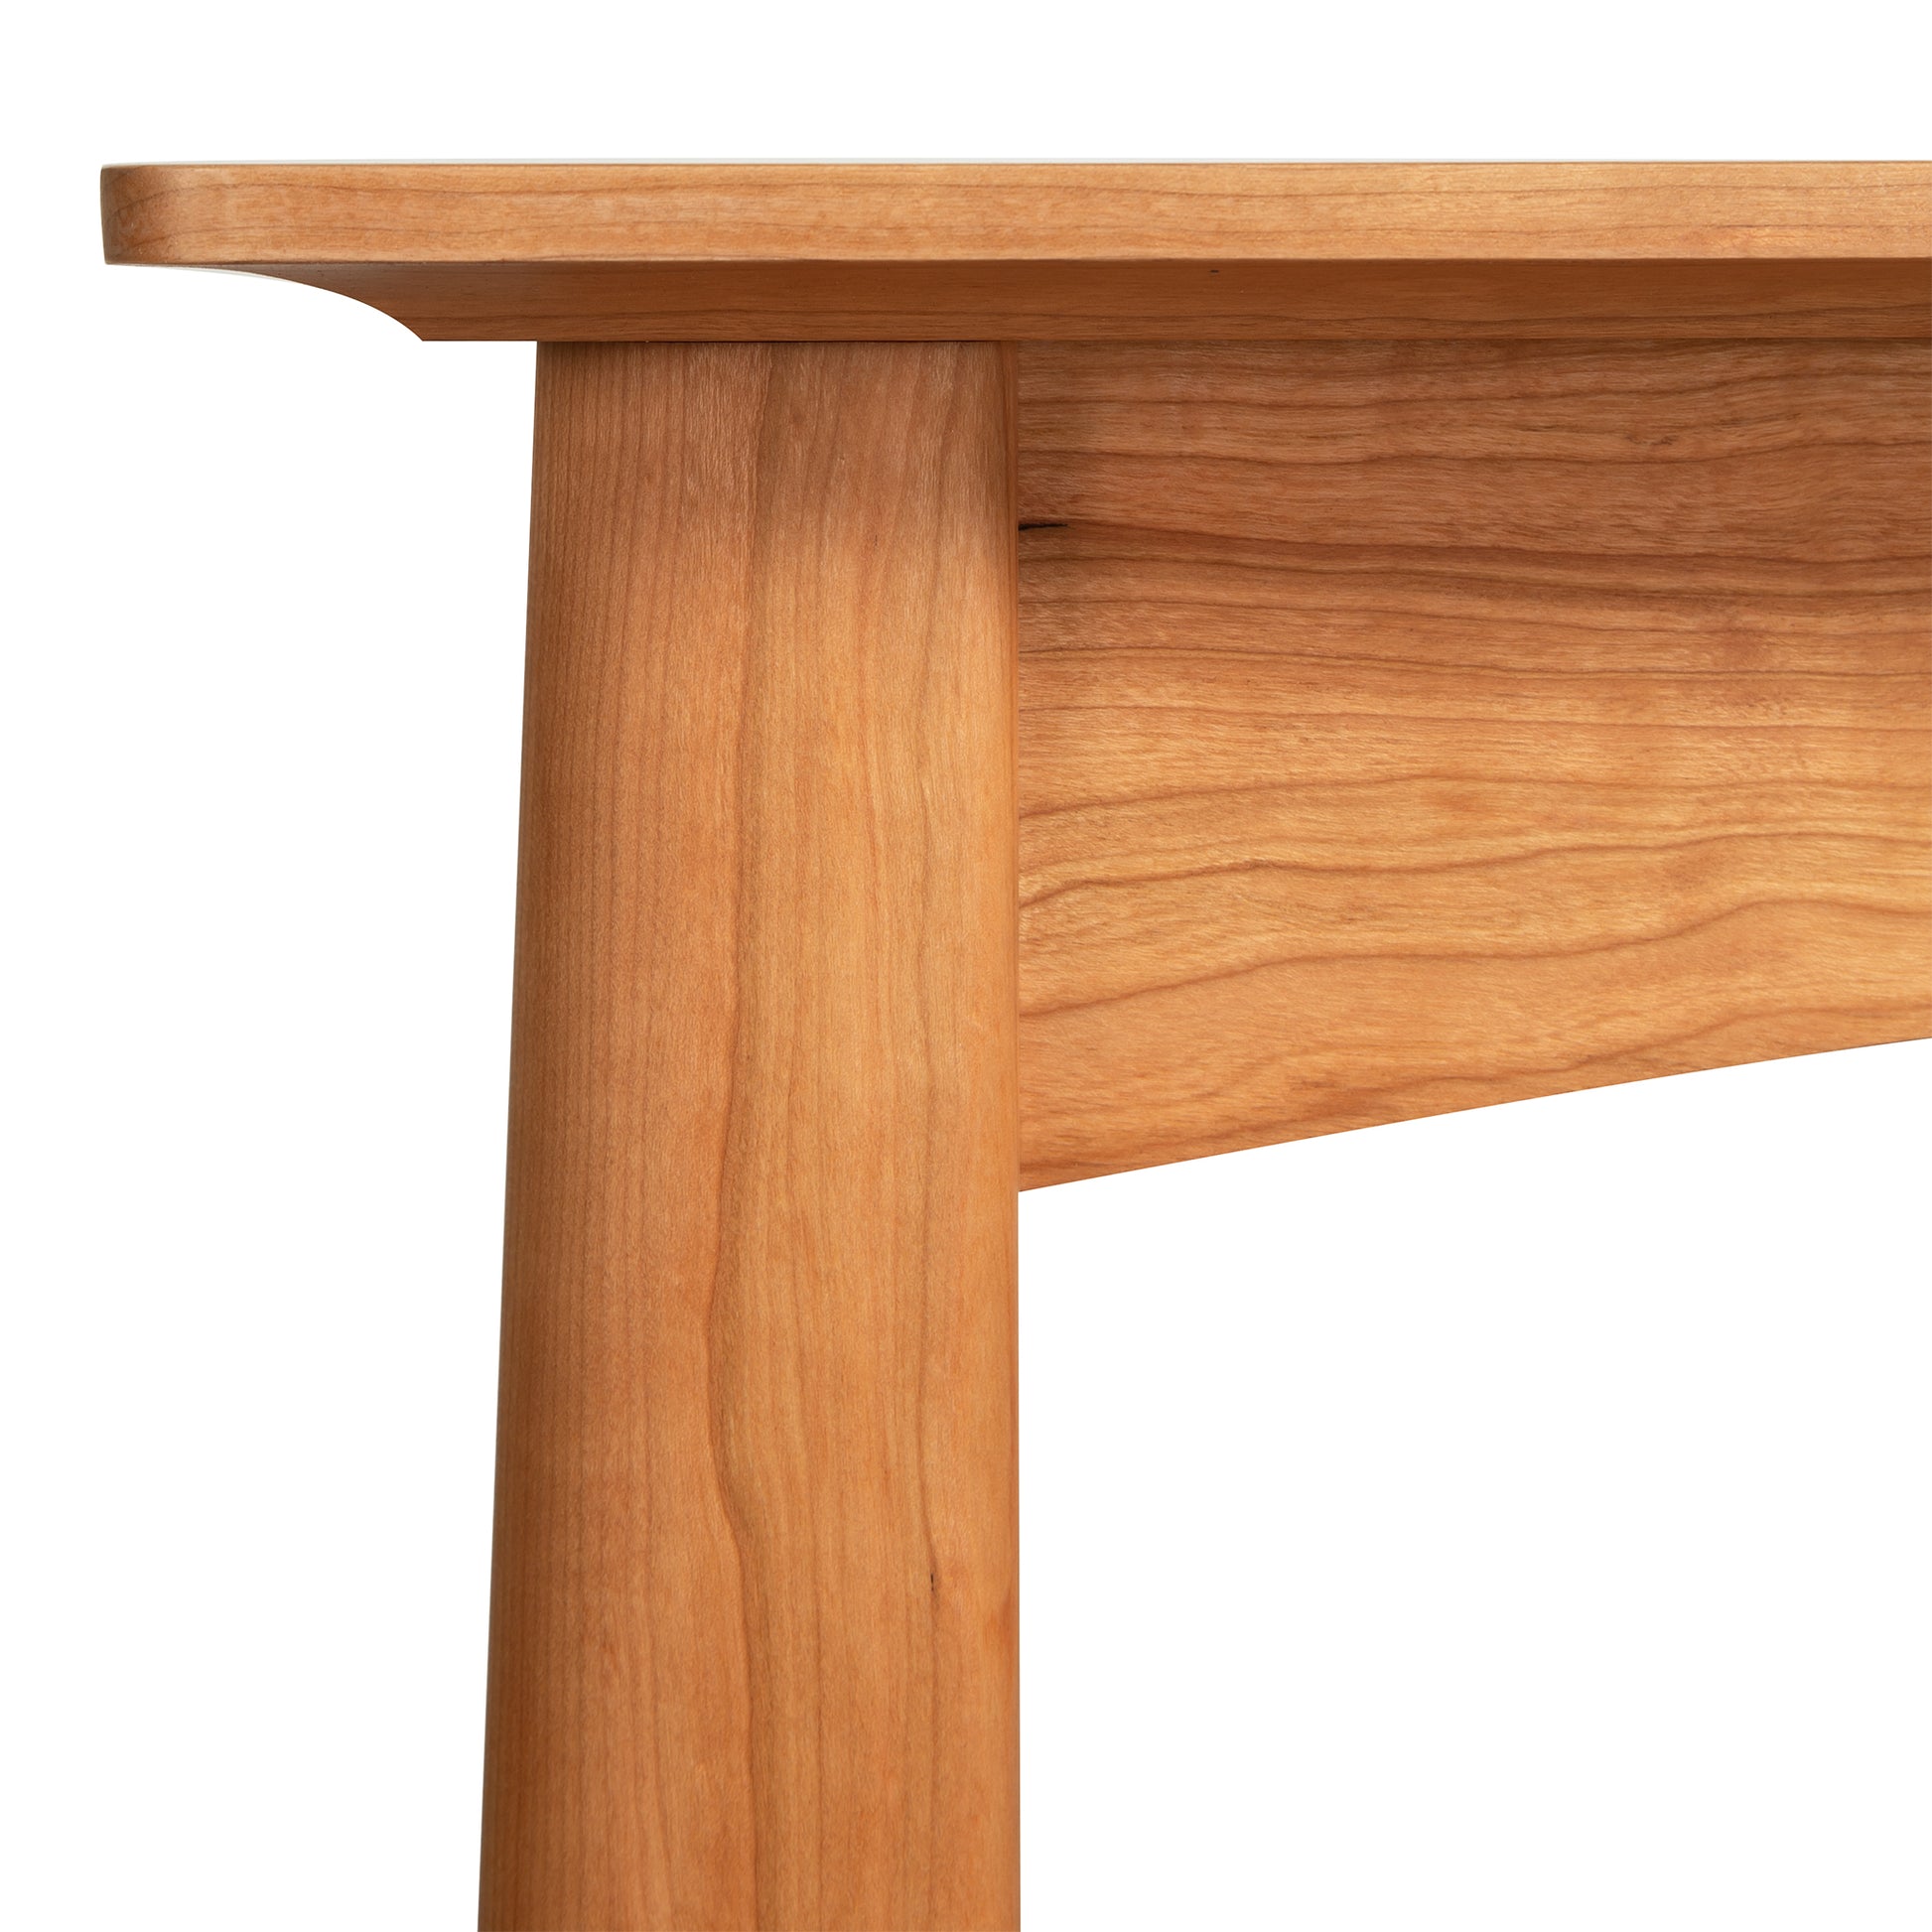 Close-up view of a Maple Corner Woodworks Cherry Moon Sofa Table, highlighting the smooth surface of the tabletop and the grainy texture of the table leg and support beam.